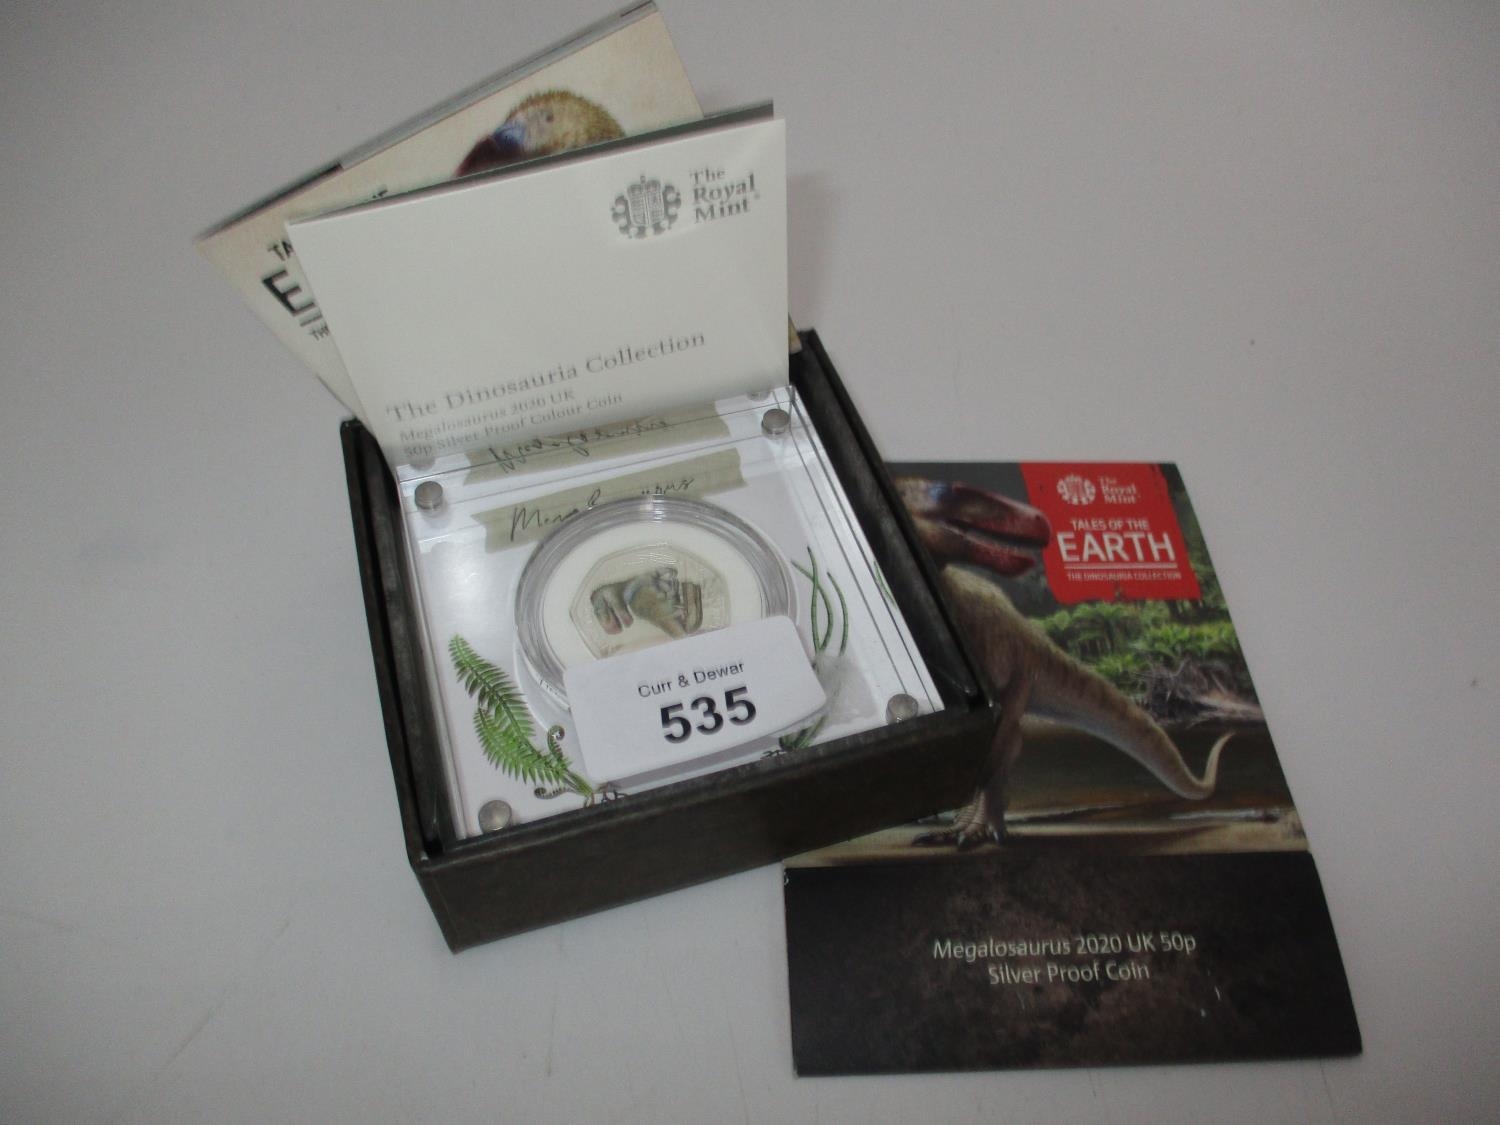 Royal Mint The Dinosauria Collection Megalosaurus 2020 UK 50p Silver Proof Coin No. 2322